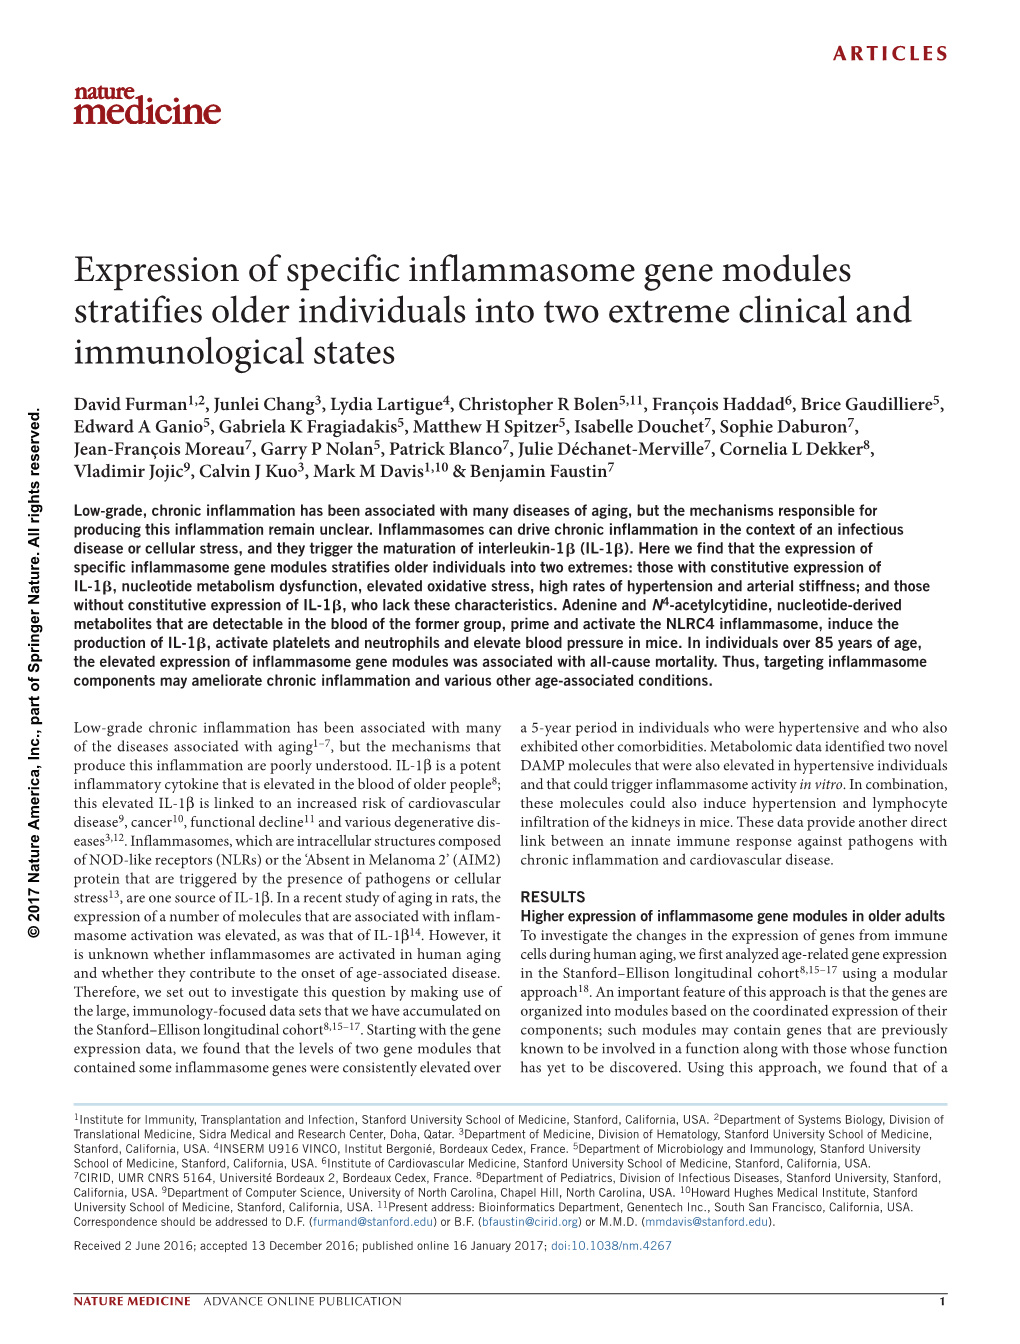 Expression of Specific Inflammasome Gene Modules Stratifies Older